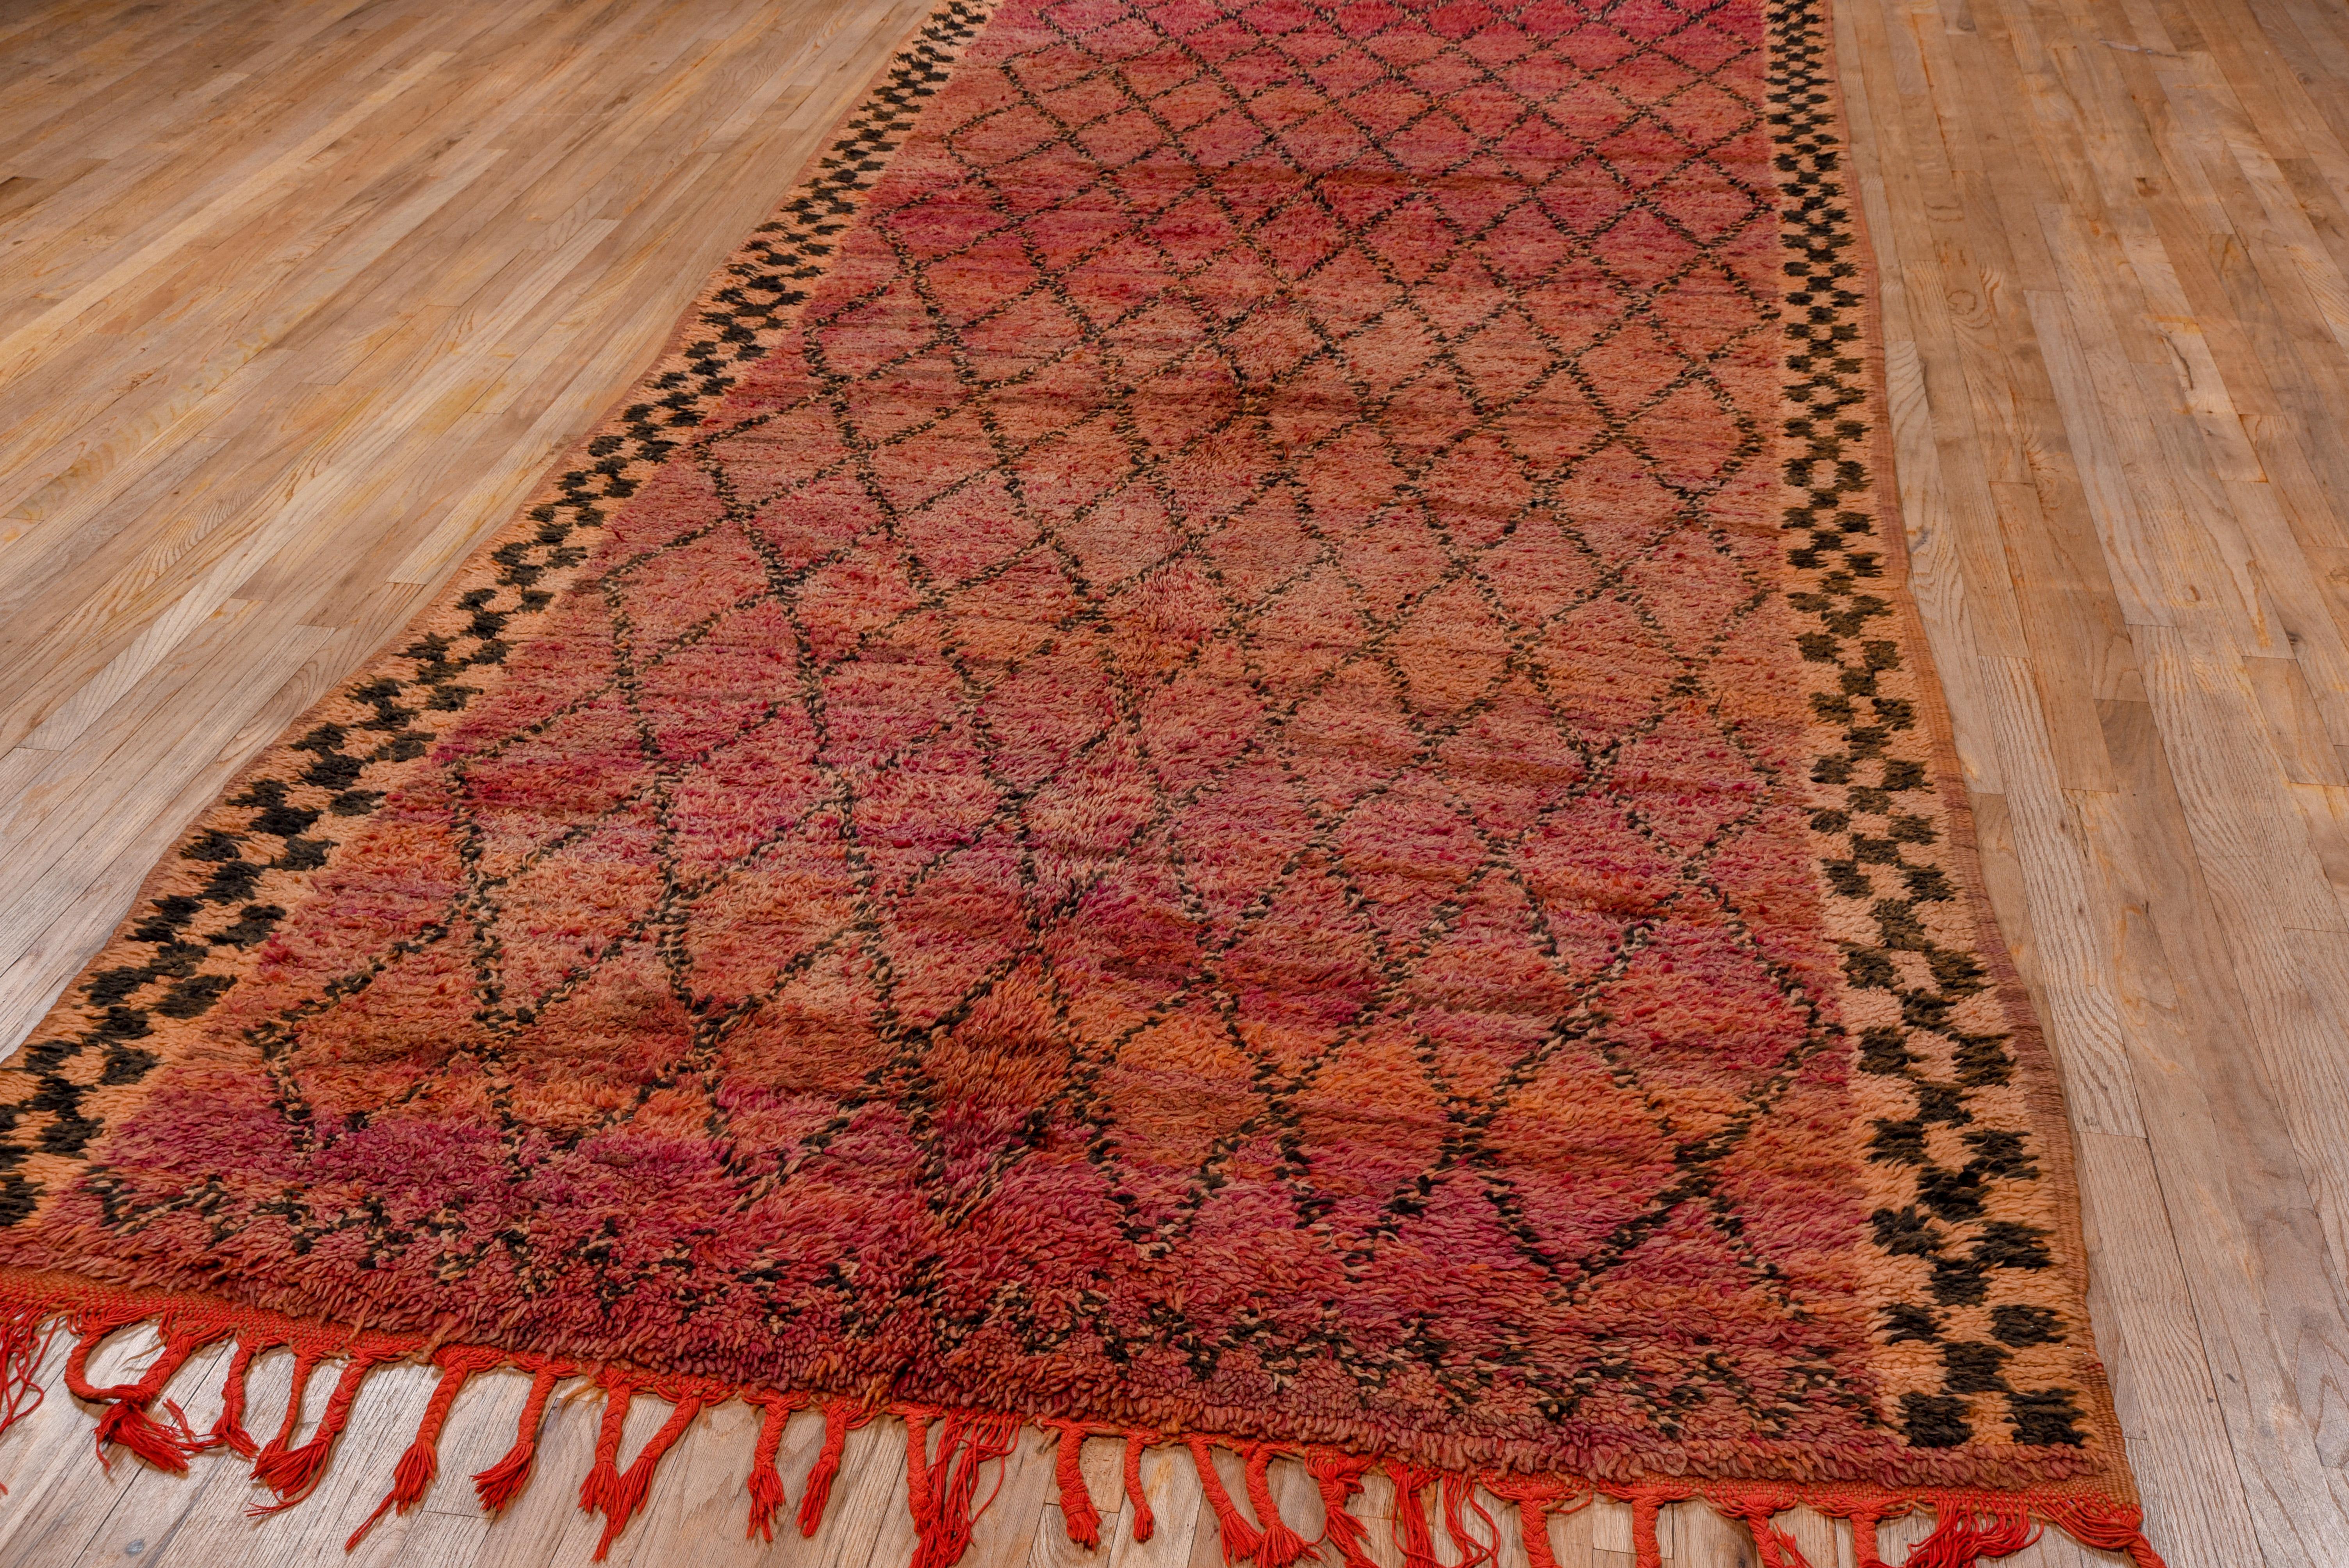 The orange side borders of conjoint position the abrashed raspberry field with a dashed brown open lozenge lattice pattern. Flat-woven pile-tone band at one end, tassels at the other. Good condition. Unusual palette.